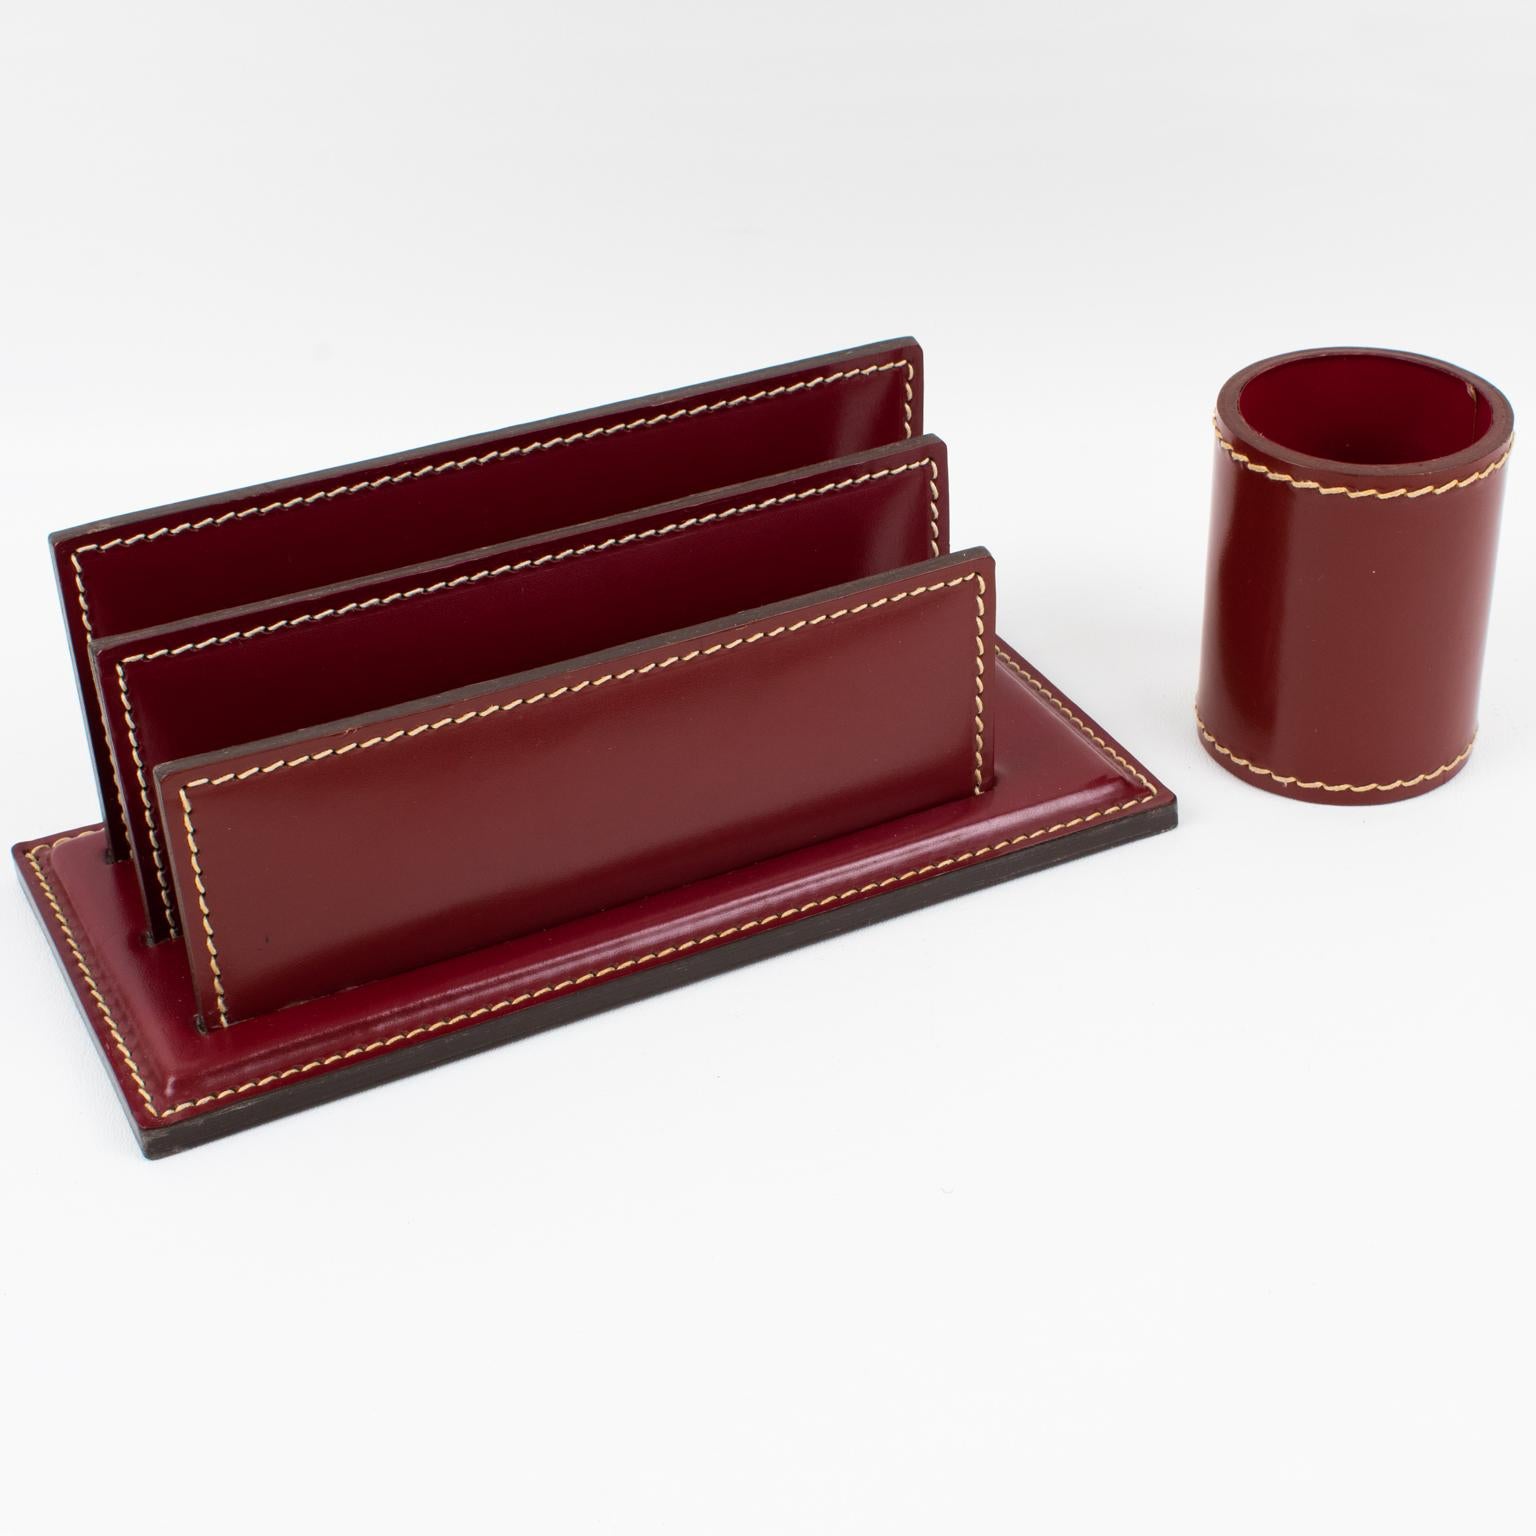 A functional 1940s modernist desk accessories set designed by ILG, Belgium, in the 1940s. The set is built with a letter holder and a pen holder. The streamlined shape boasts burgundy-red hand-stitched leather for both pieces. This gorgeous addition